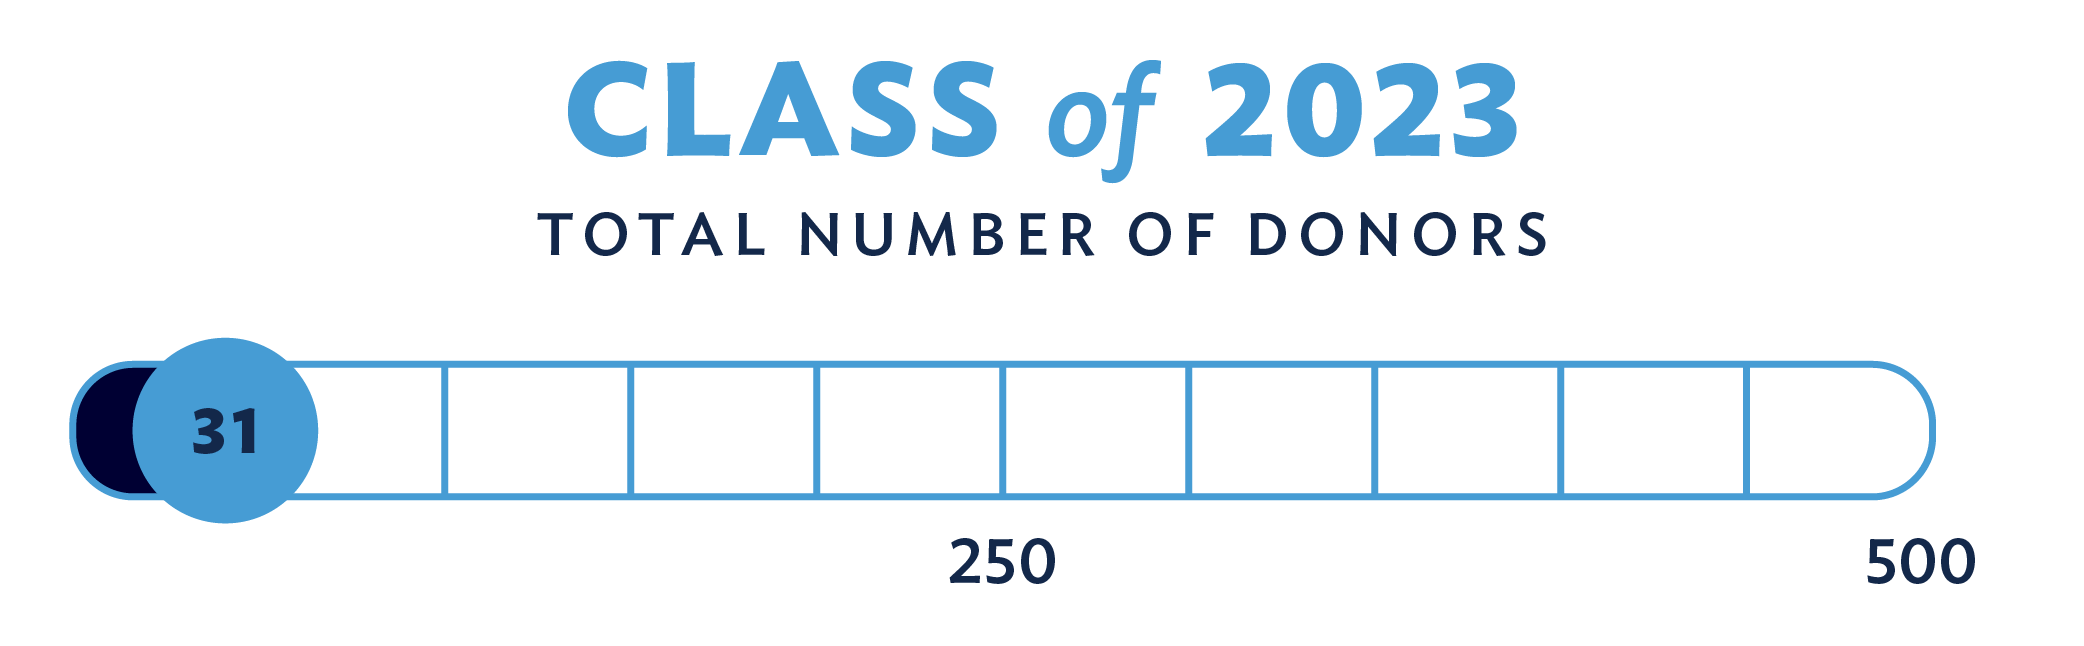 Class of 2023 Total number of donors: 31 out of a goal of 500